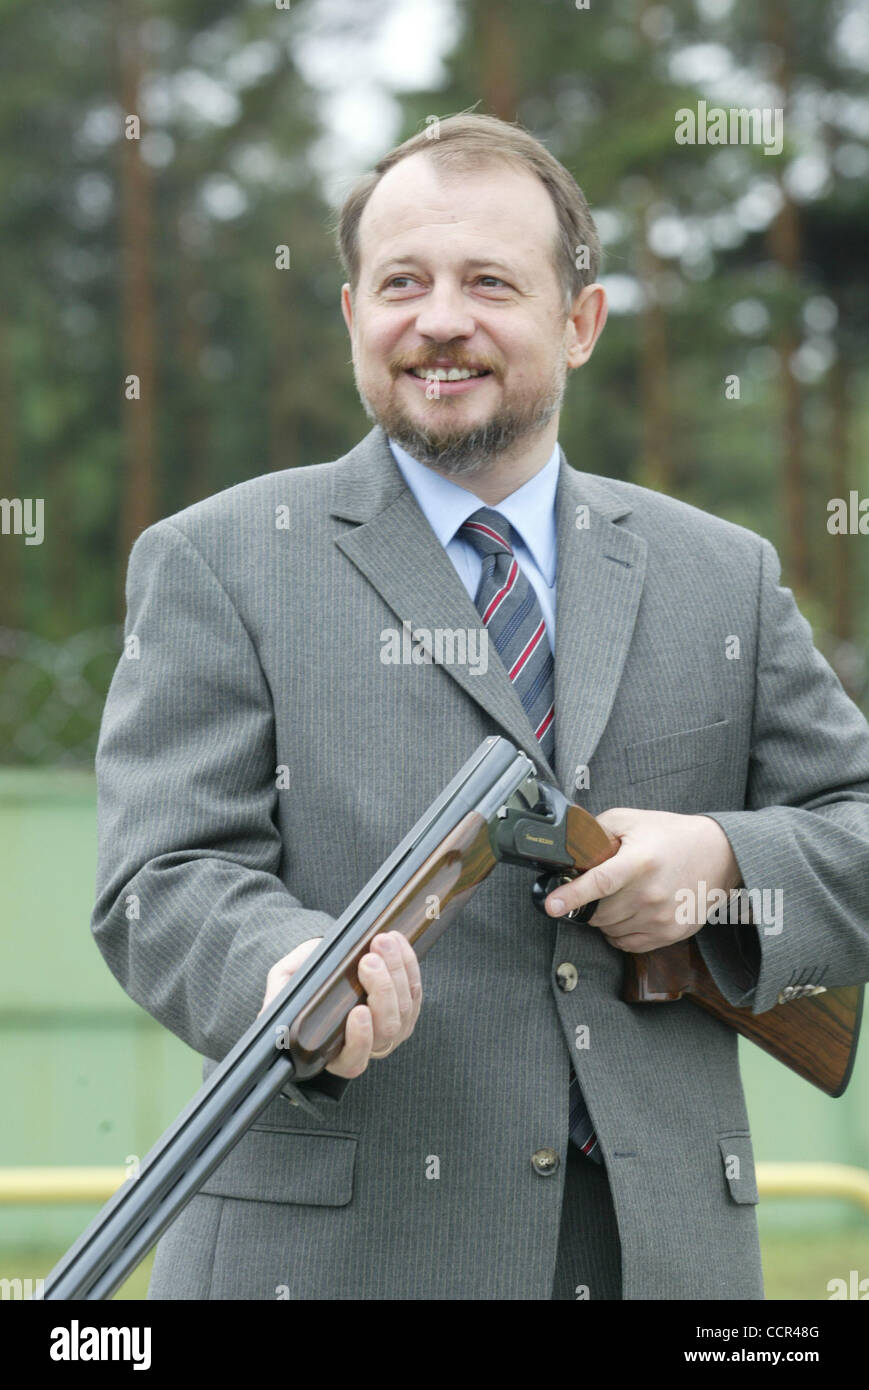 Billionaire Vladimir Lisin has been named the richest man in Russia with a net worth of $15.8bn, according to by the Forbes magazine. The businessman owes his wealth to the Novolipetsk steel mill.  Pictured: Vladimir Lisin pictured with a rifle while visiting `Fox Borrow` Sport Facility near Moscow Stock Photo